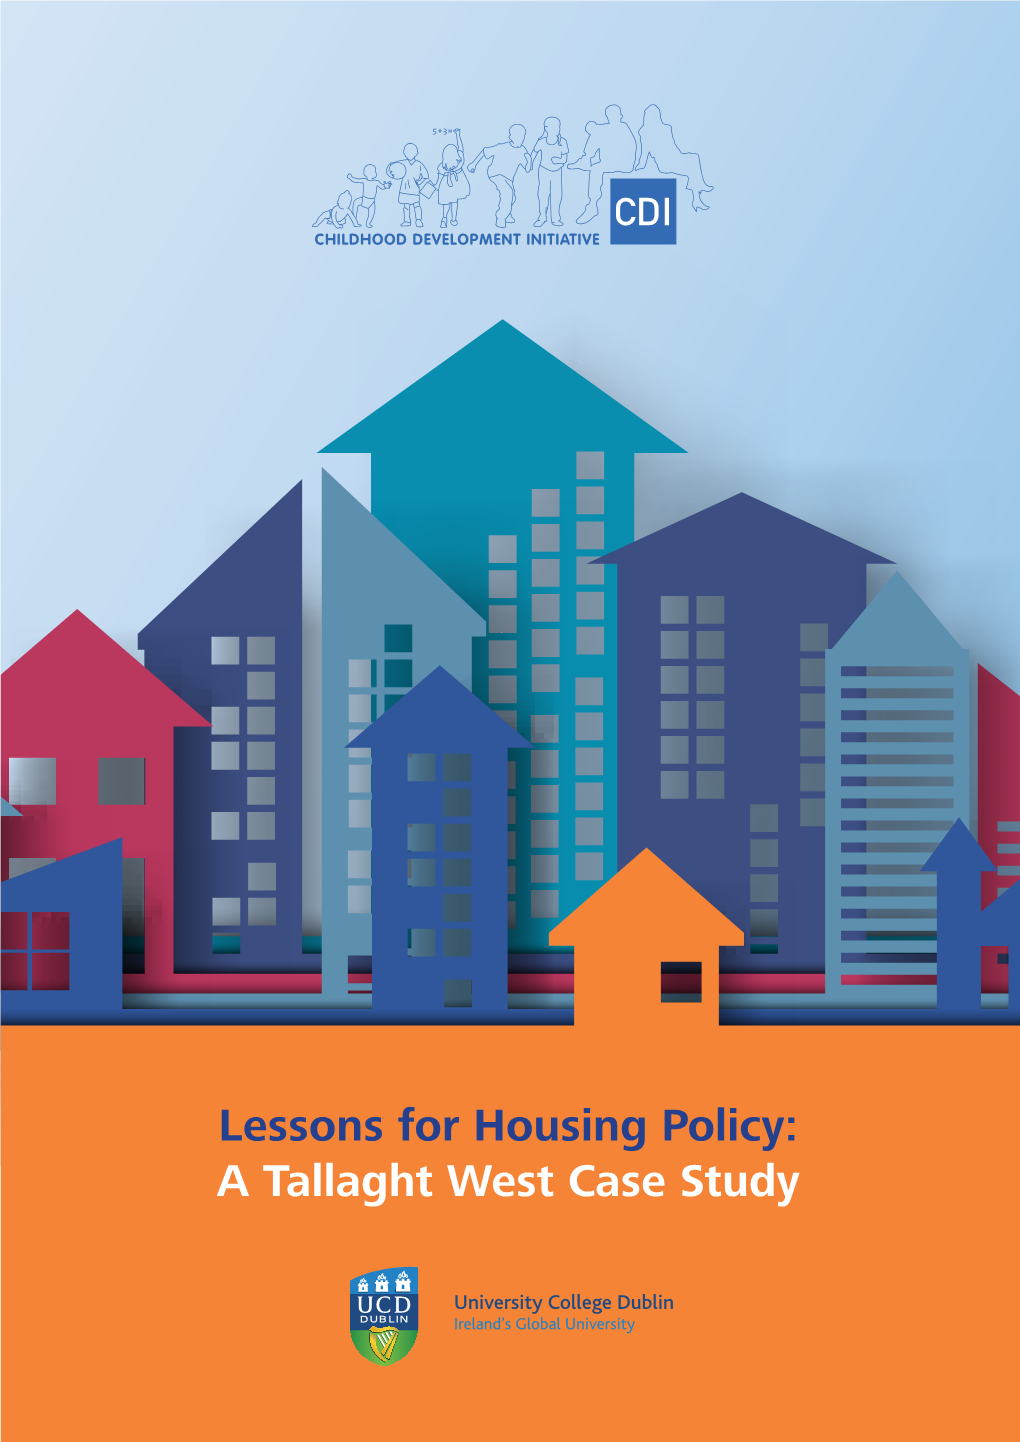 Lessons for Housing Policy: a Tallaght West Case Study Response from Professor Tony Fahey